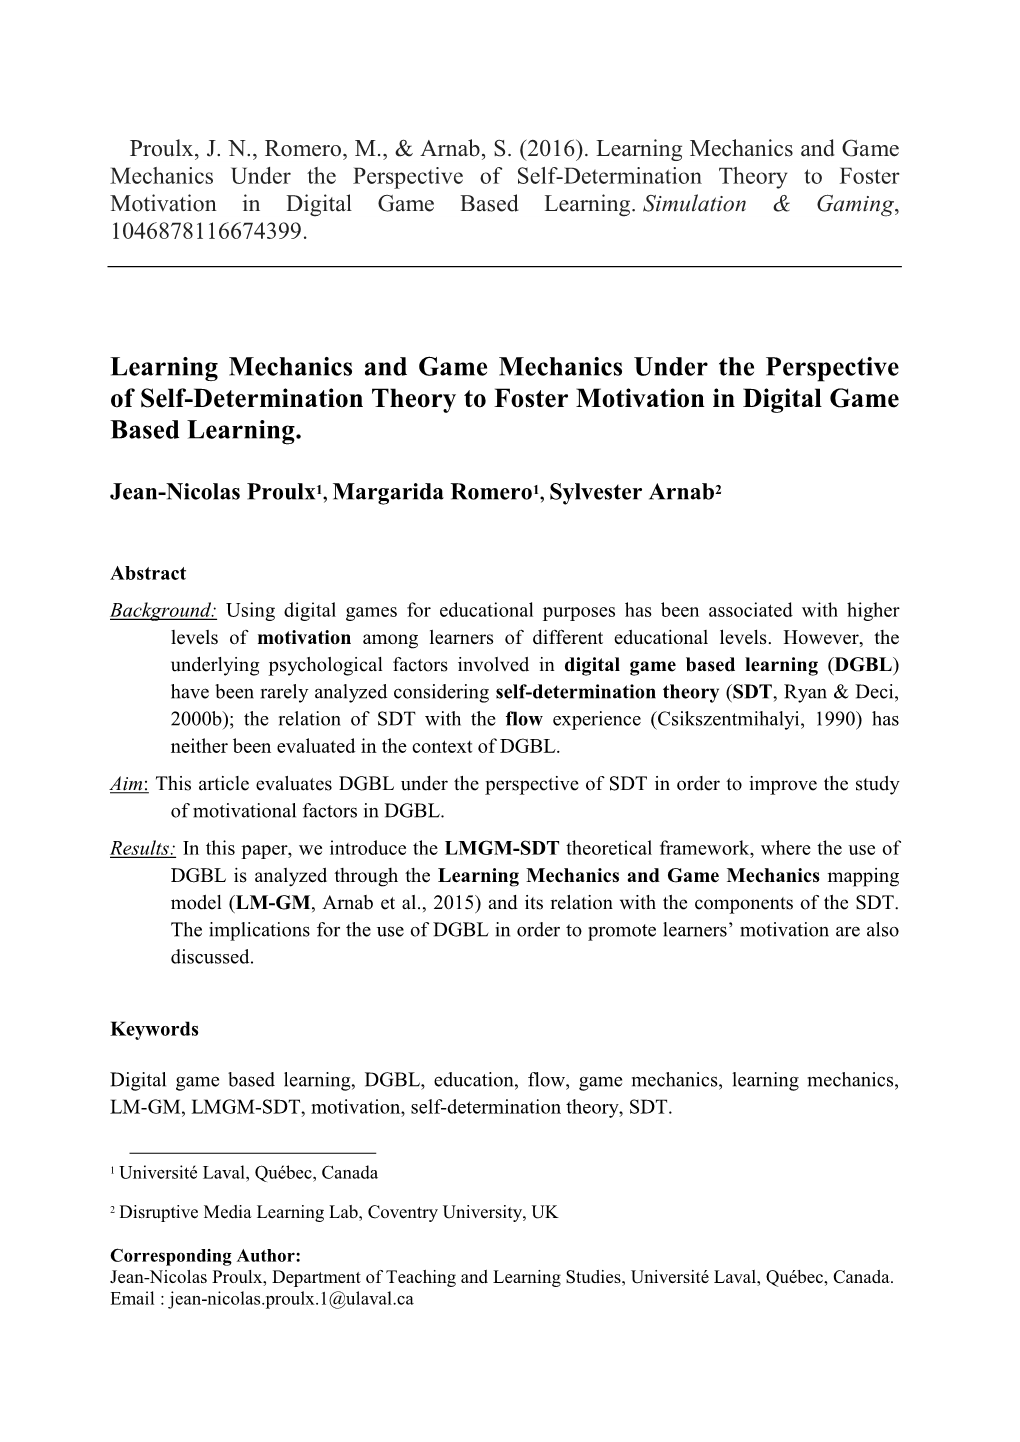 Learning Mechanics and Game Mechanics Under the Perspective of Self-Determination Theory to Foster Motivation in Digital Game Based Learning